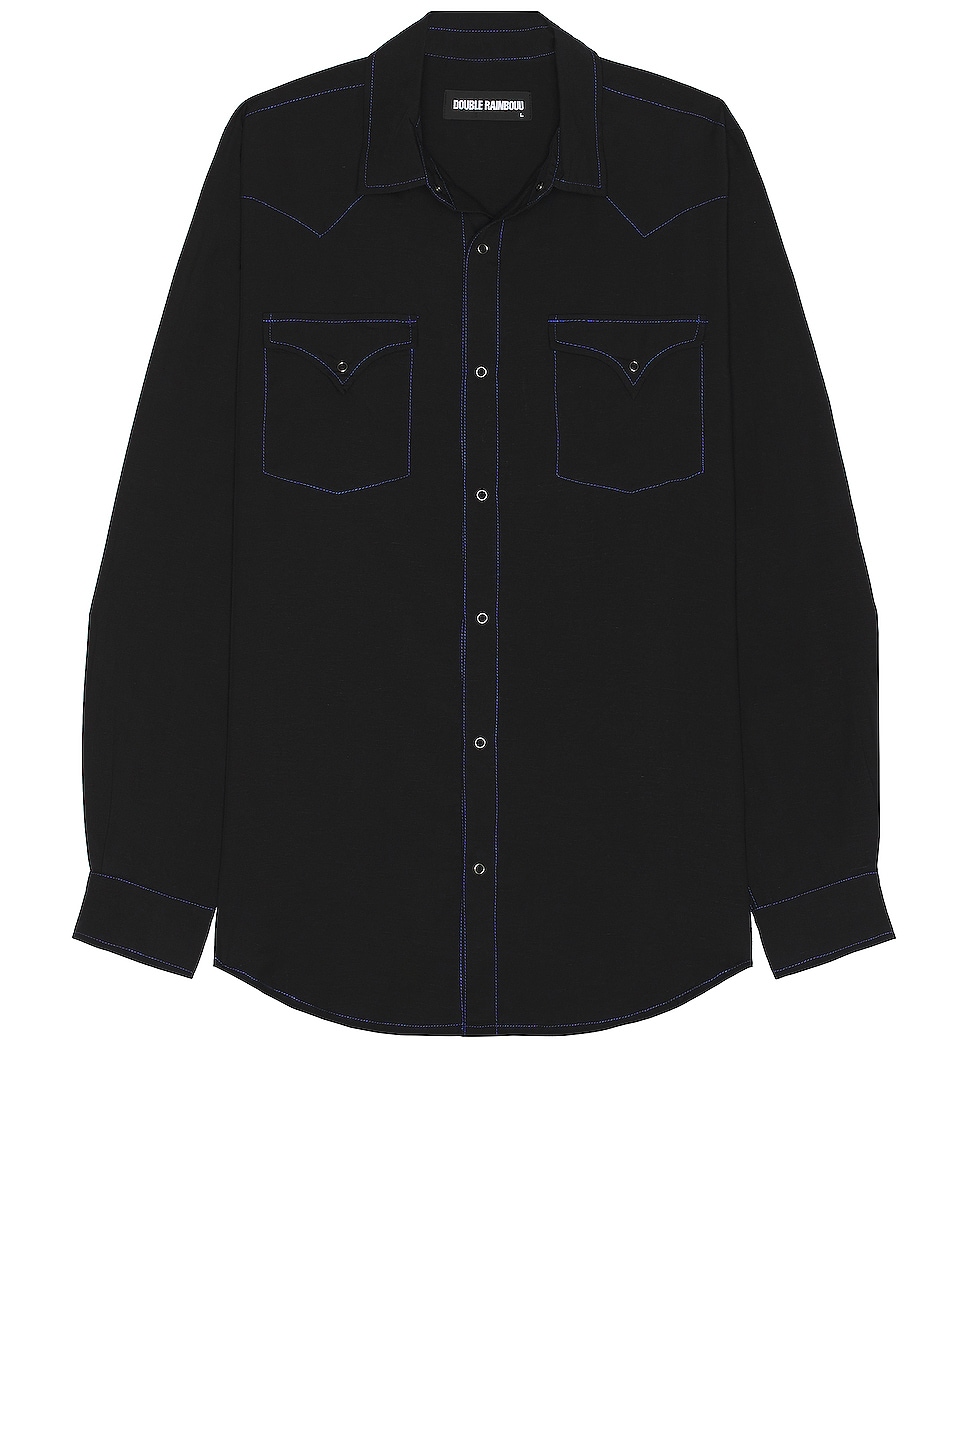 Image 1 of DOUBLE RAINBOUU West World Shirt in Black Contrast